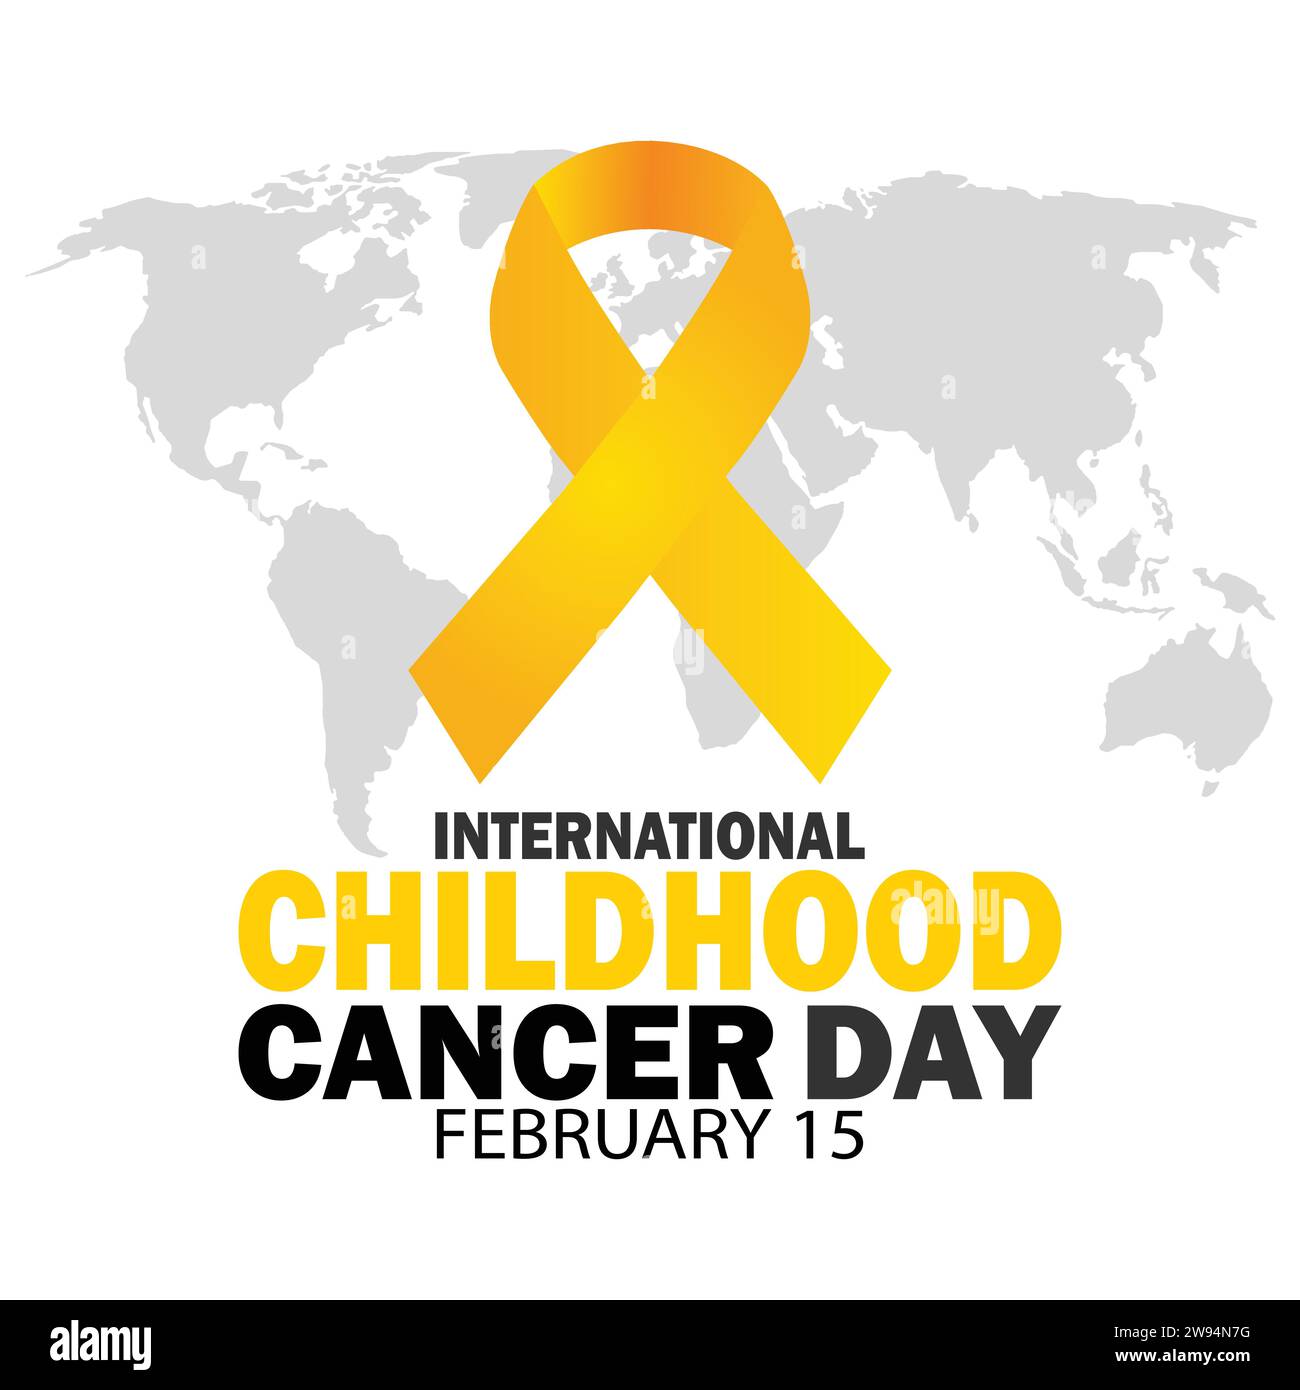 International Childhood Cancer Day. February 15. Holiday concept. Template for background, banner, card, poster with text inscription. Vector Stock Vector